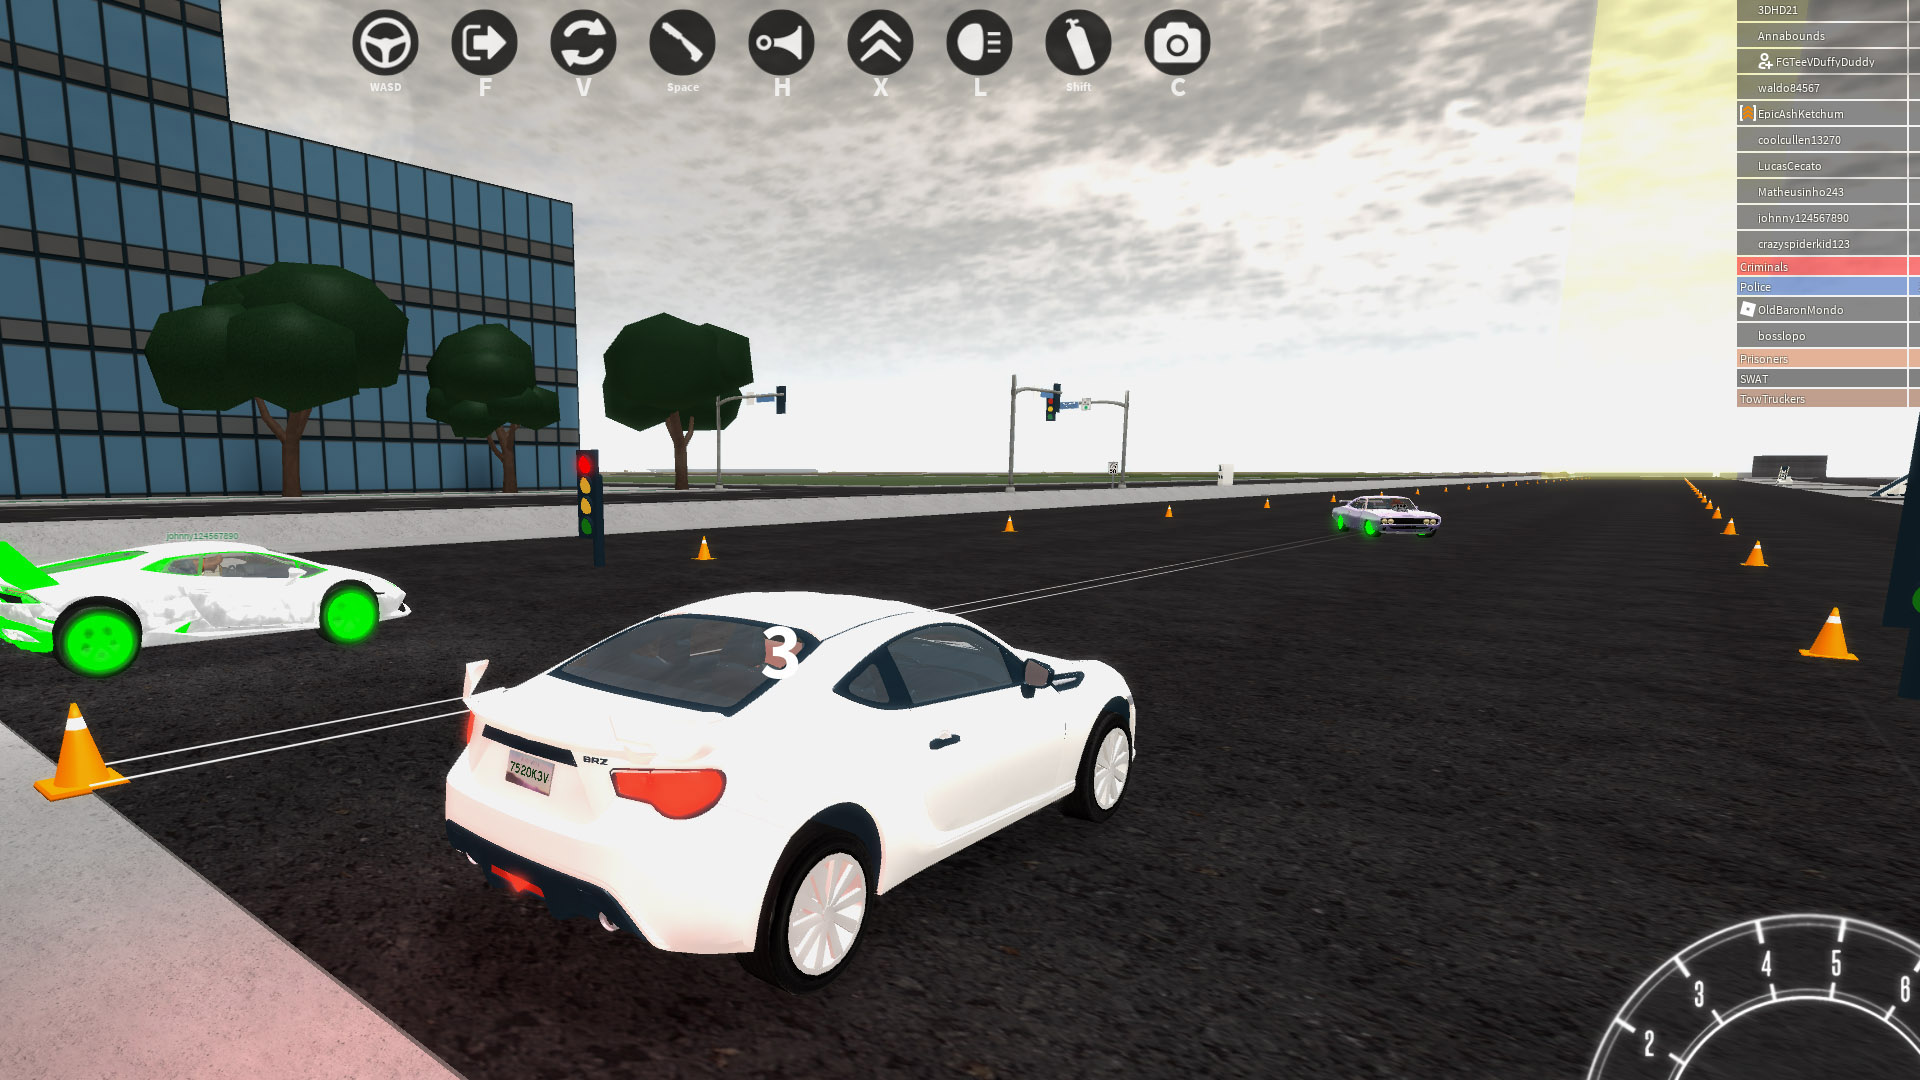 Roblox Vehicle Simulator How To Tow Cars